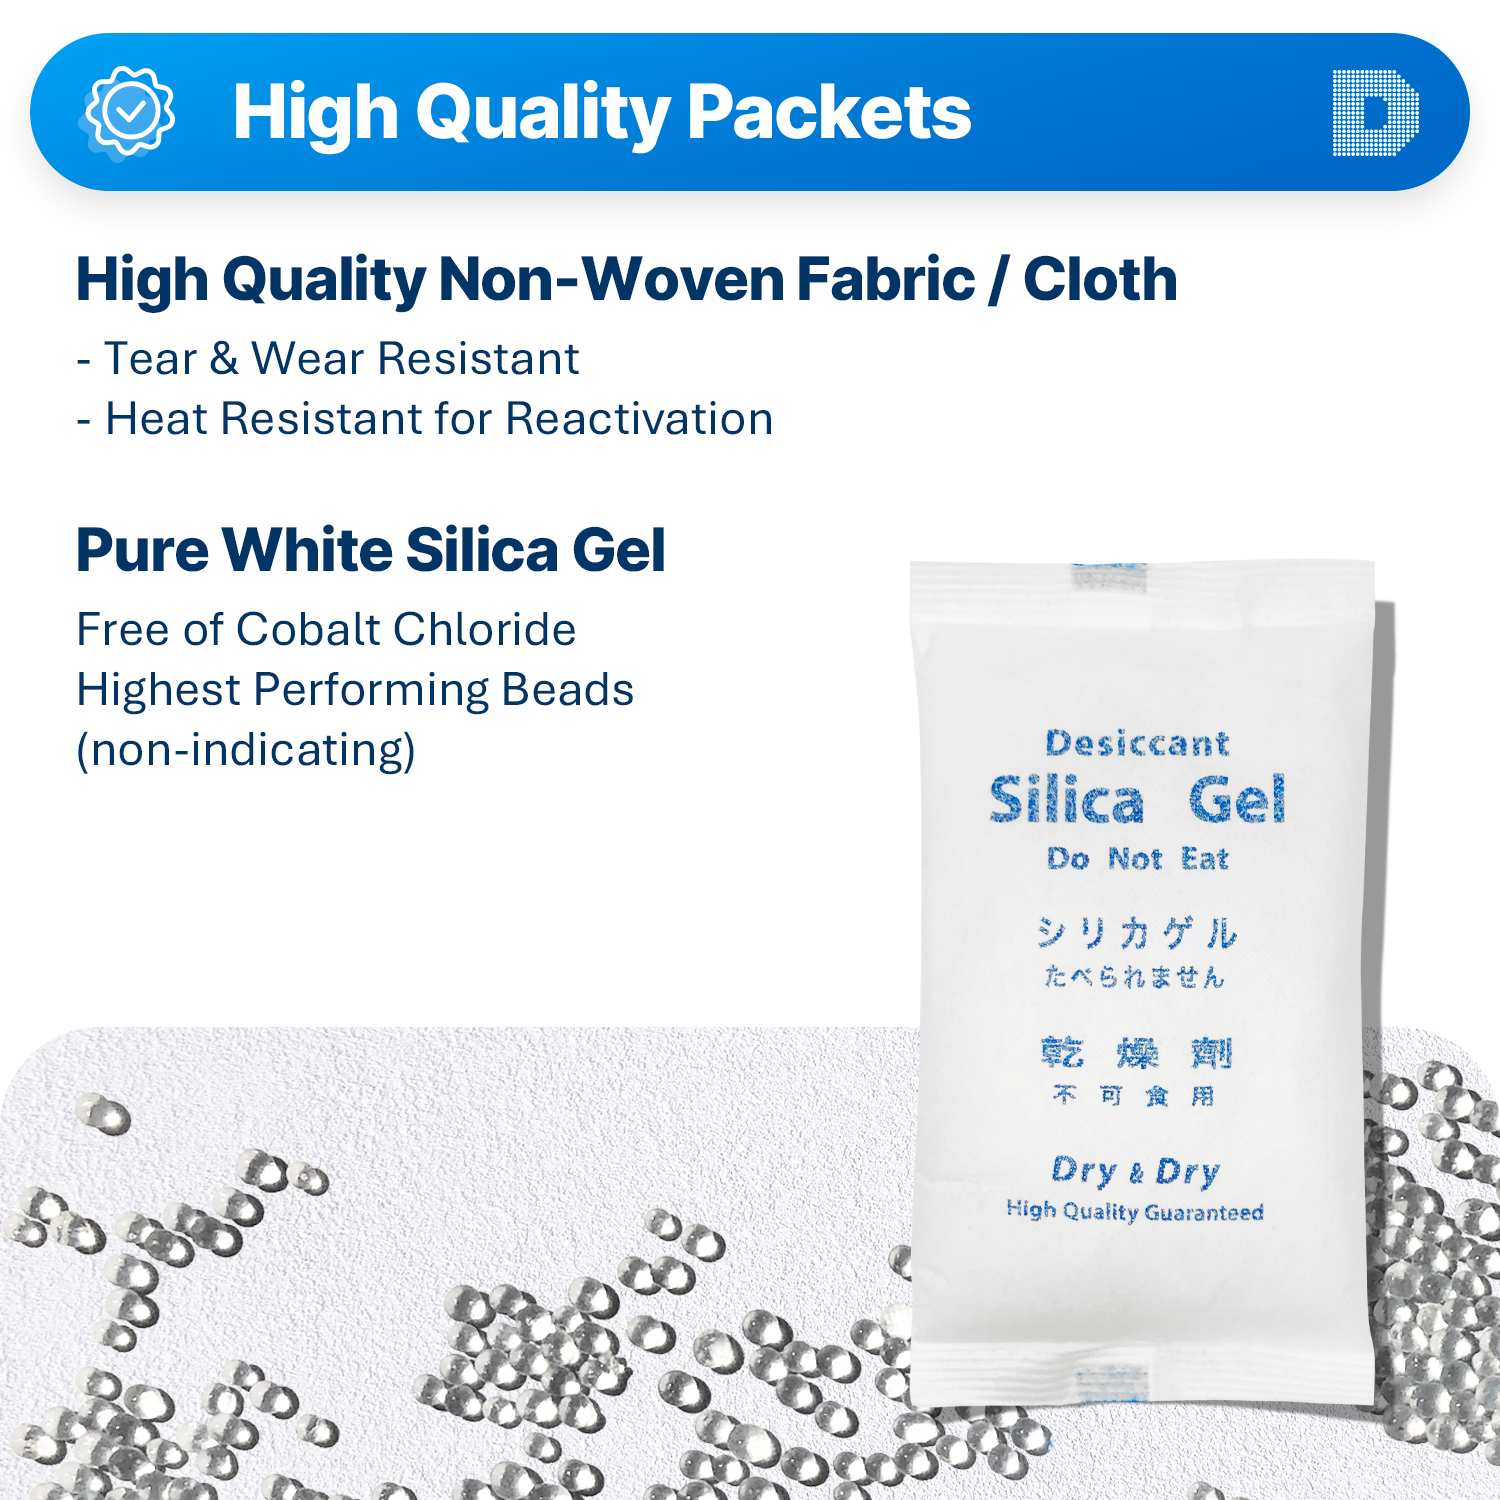 500 Gram [120 Packets]  "Dry & Dry" Premium Silica Gel Desiccant Packets - Rechargeable Fabric